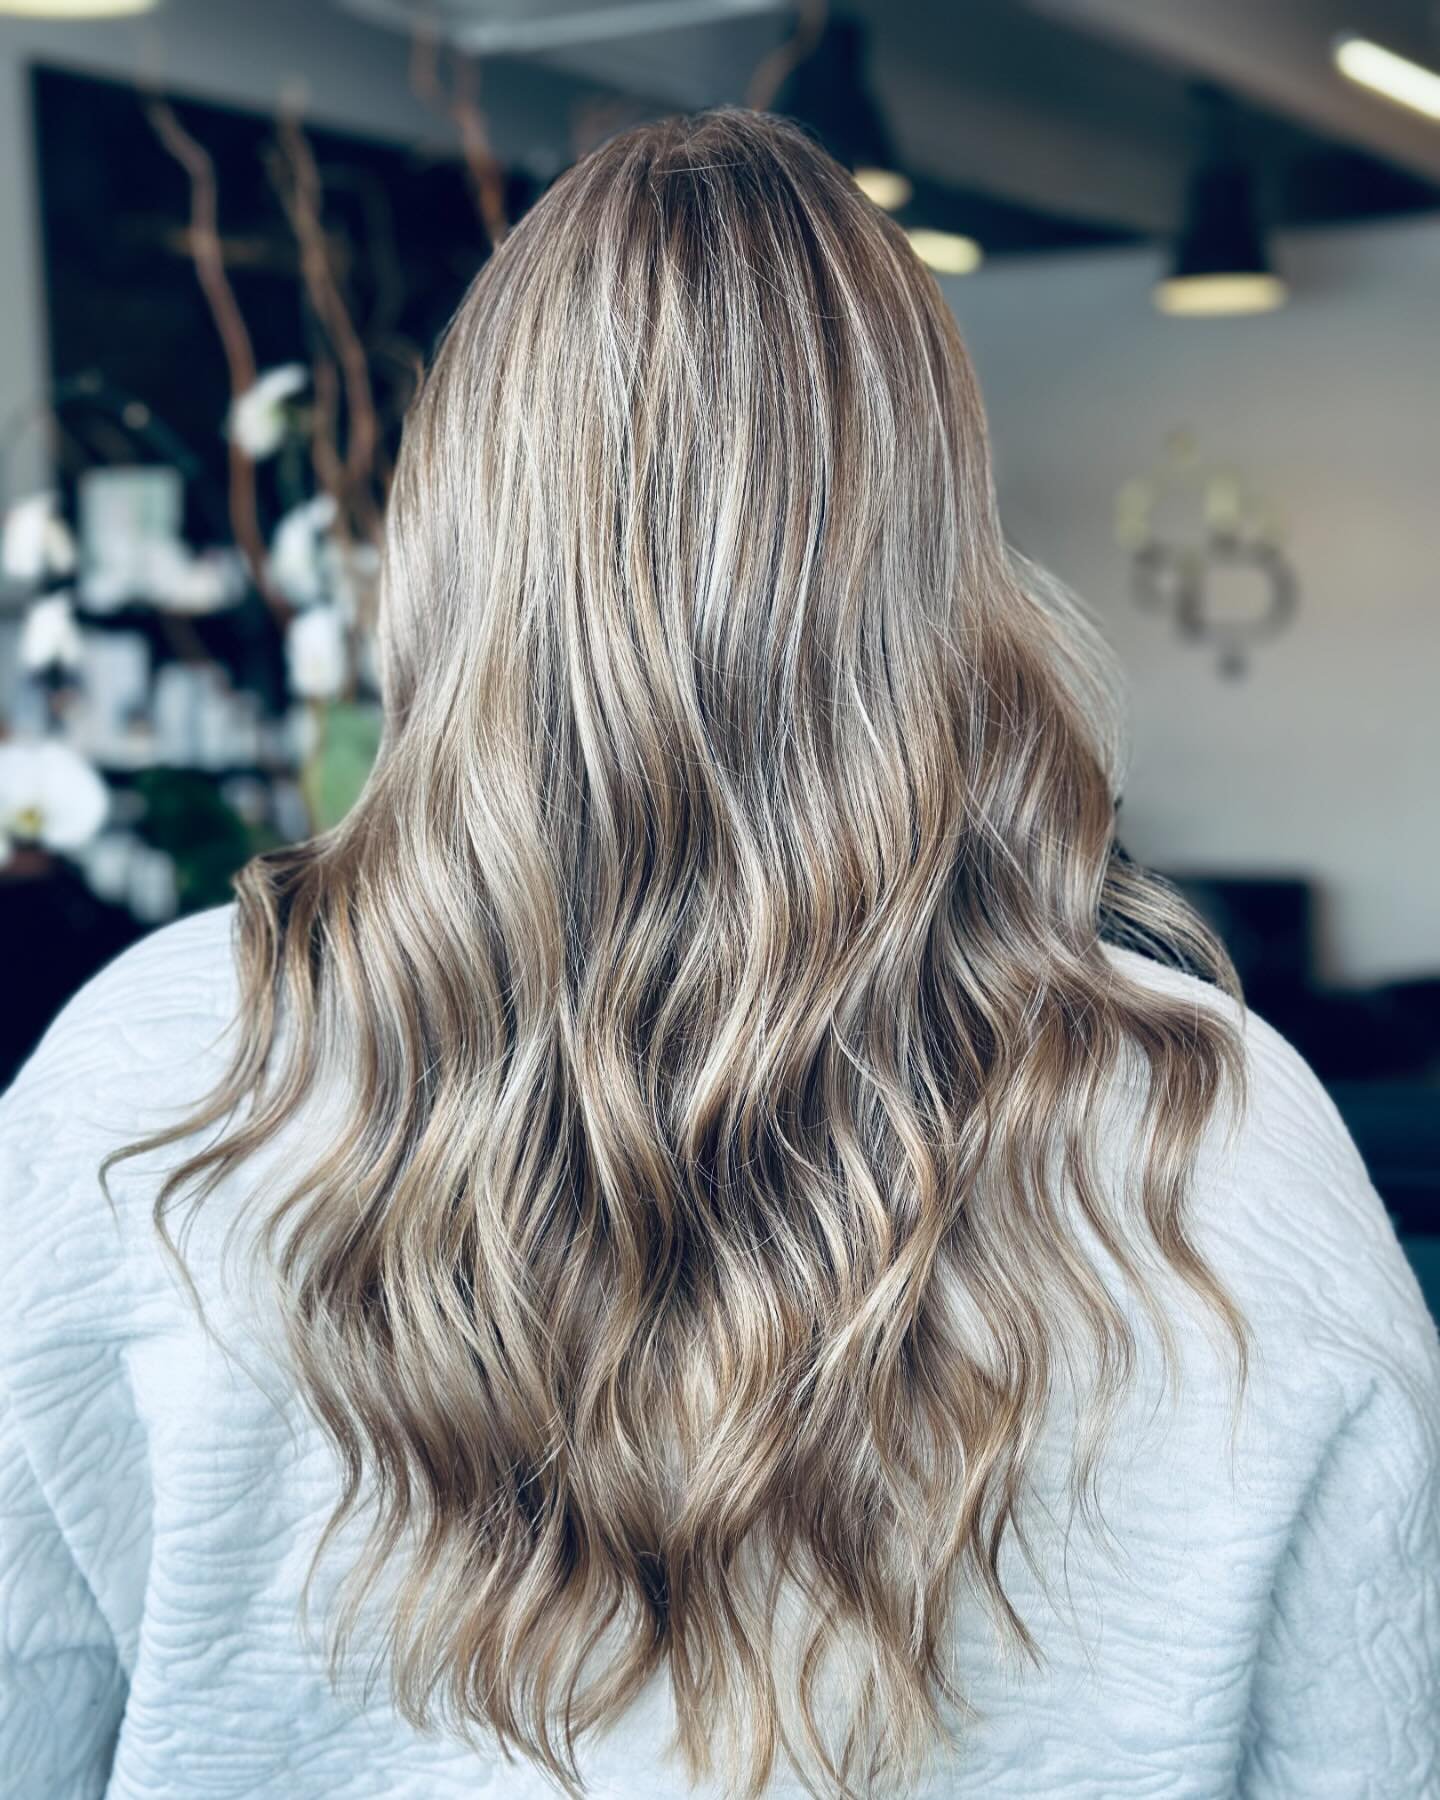 Check out this stunning creamy beige blonde transformation by our senior stylist, Trey! 💇&zwj;♀️✨ Get ready to turn heads with a look that&rsquo;s as fun as it is flawless. Book your complimentary consultation with him today and let your hair do the